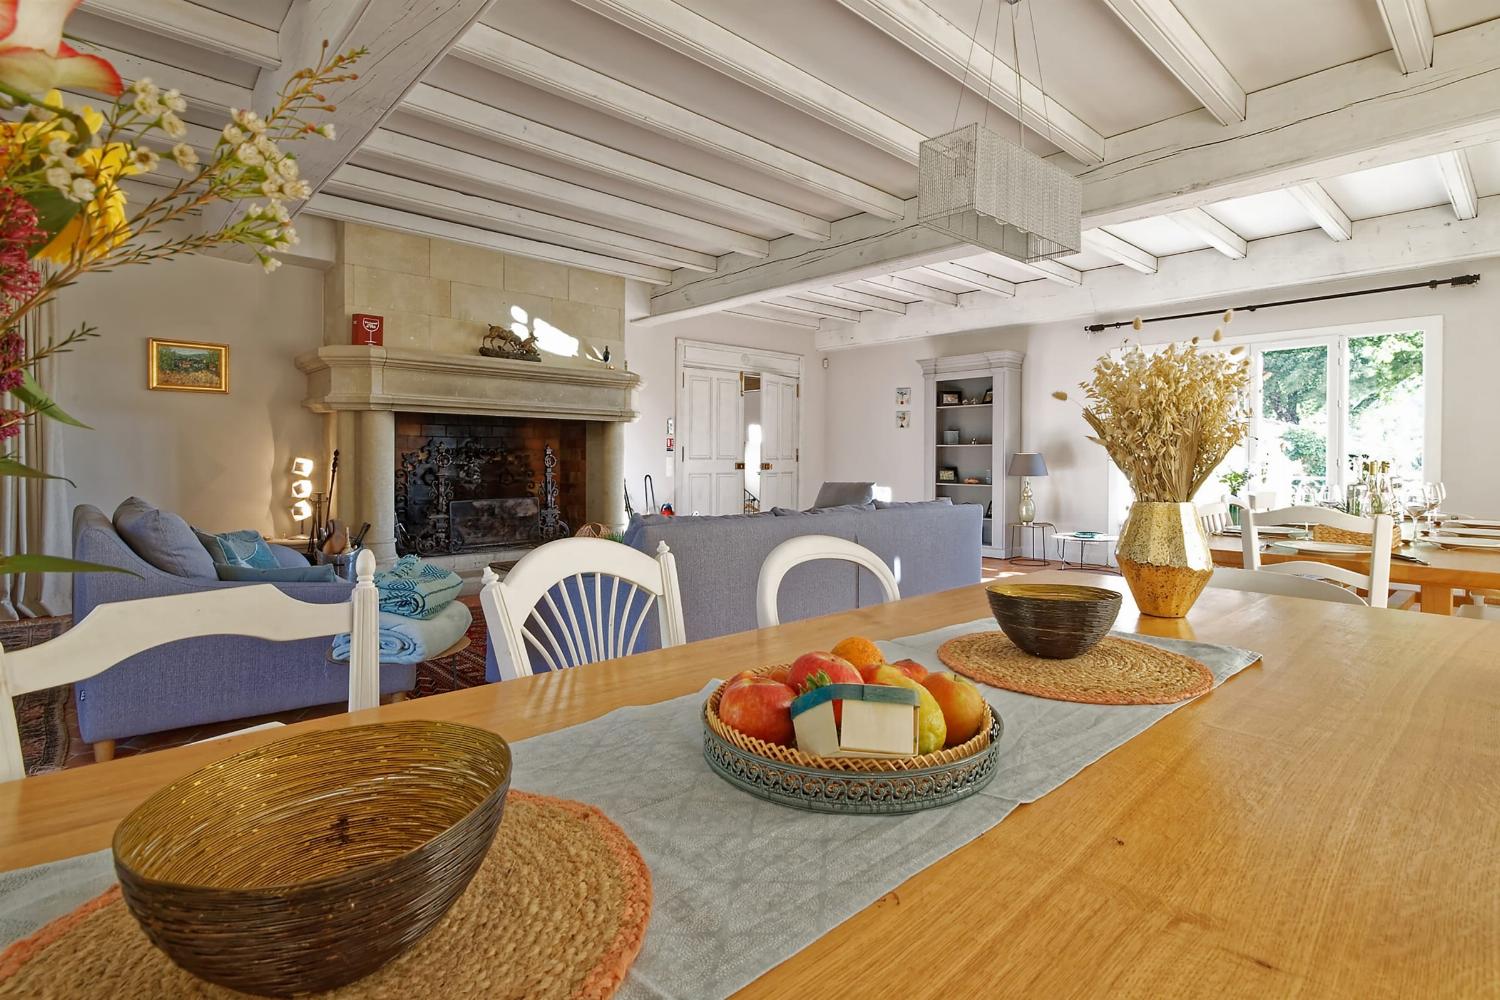 Dining room | Vacation accommodation in Provence